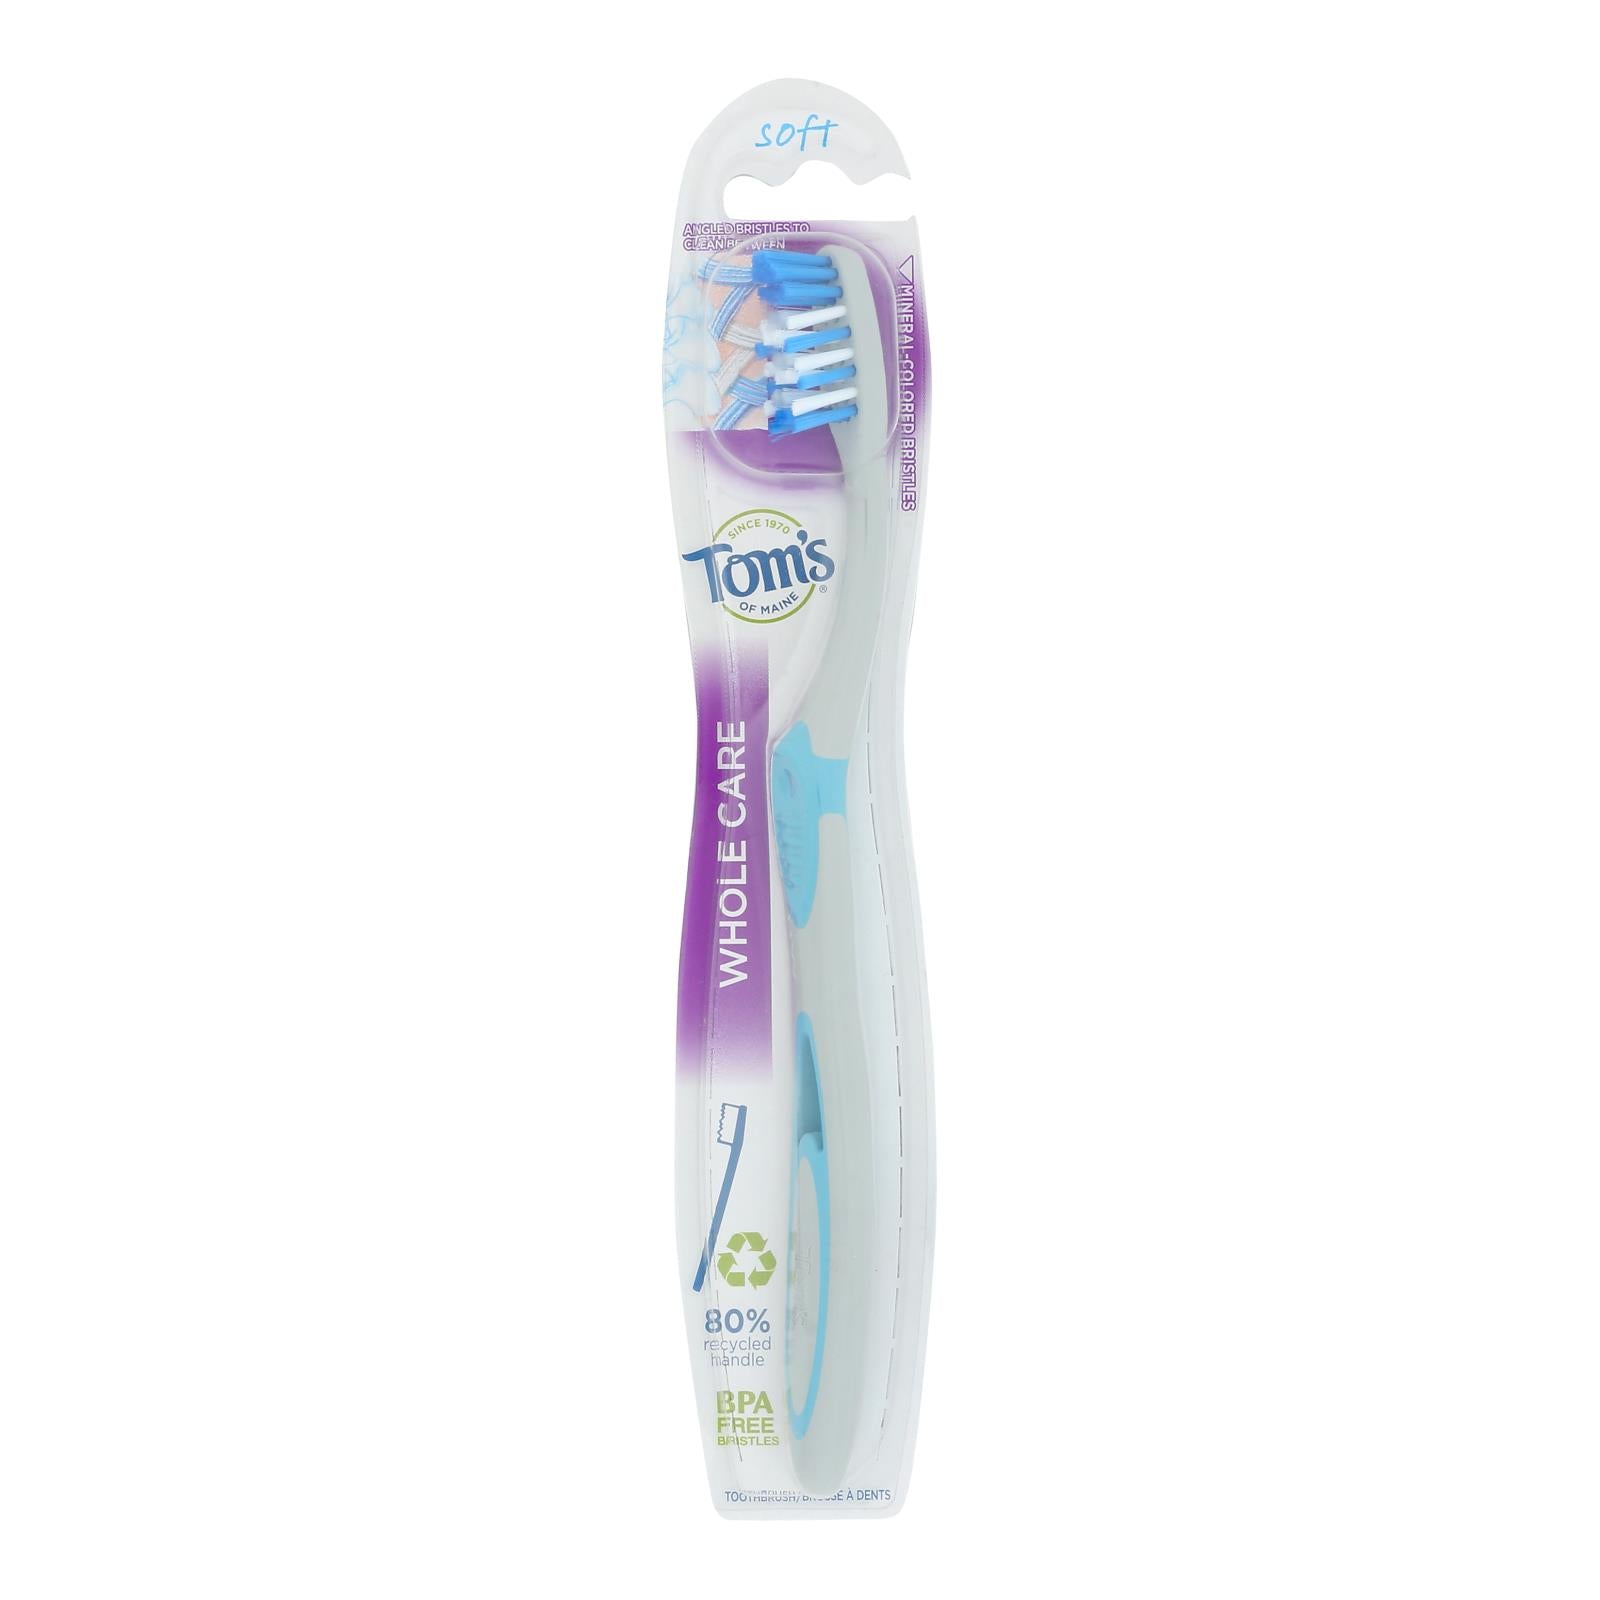 Tom's Of Maine - Tthbrush Soft Whole - Case of 6 - 1 CT